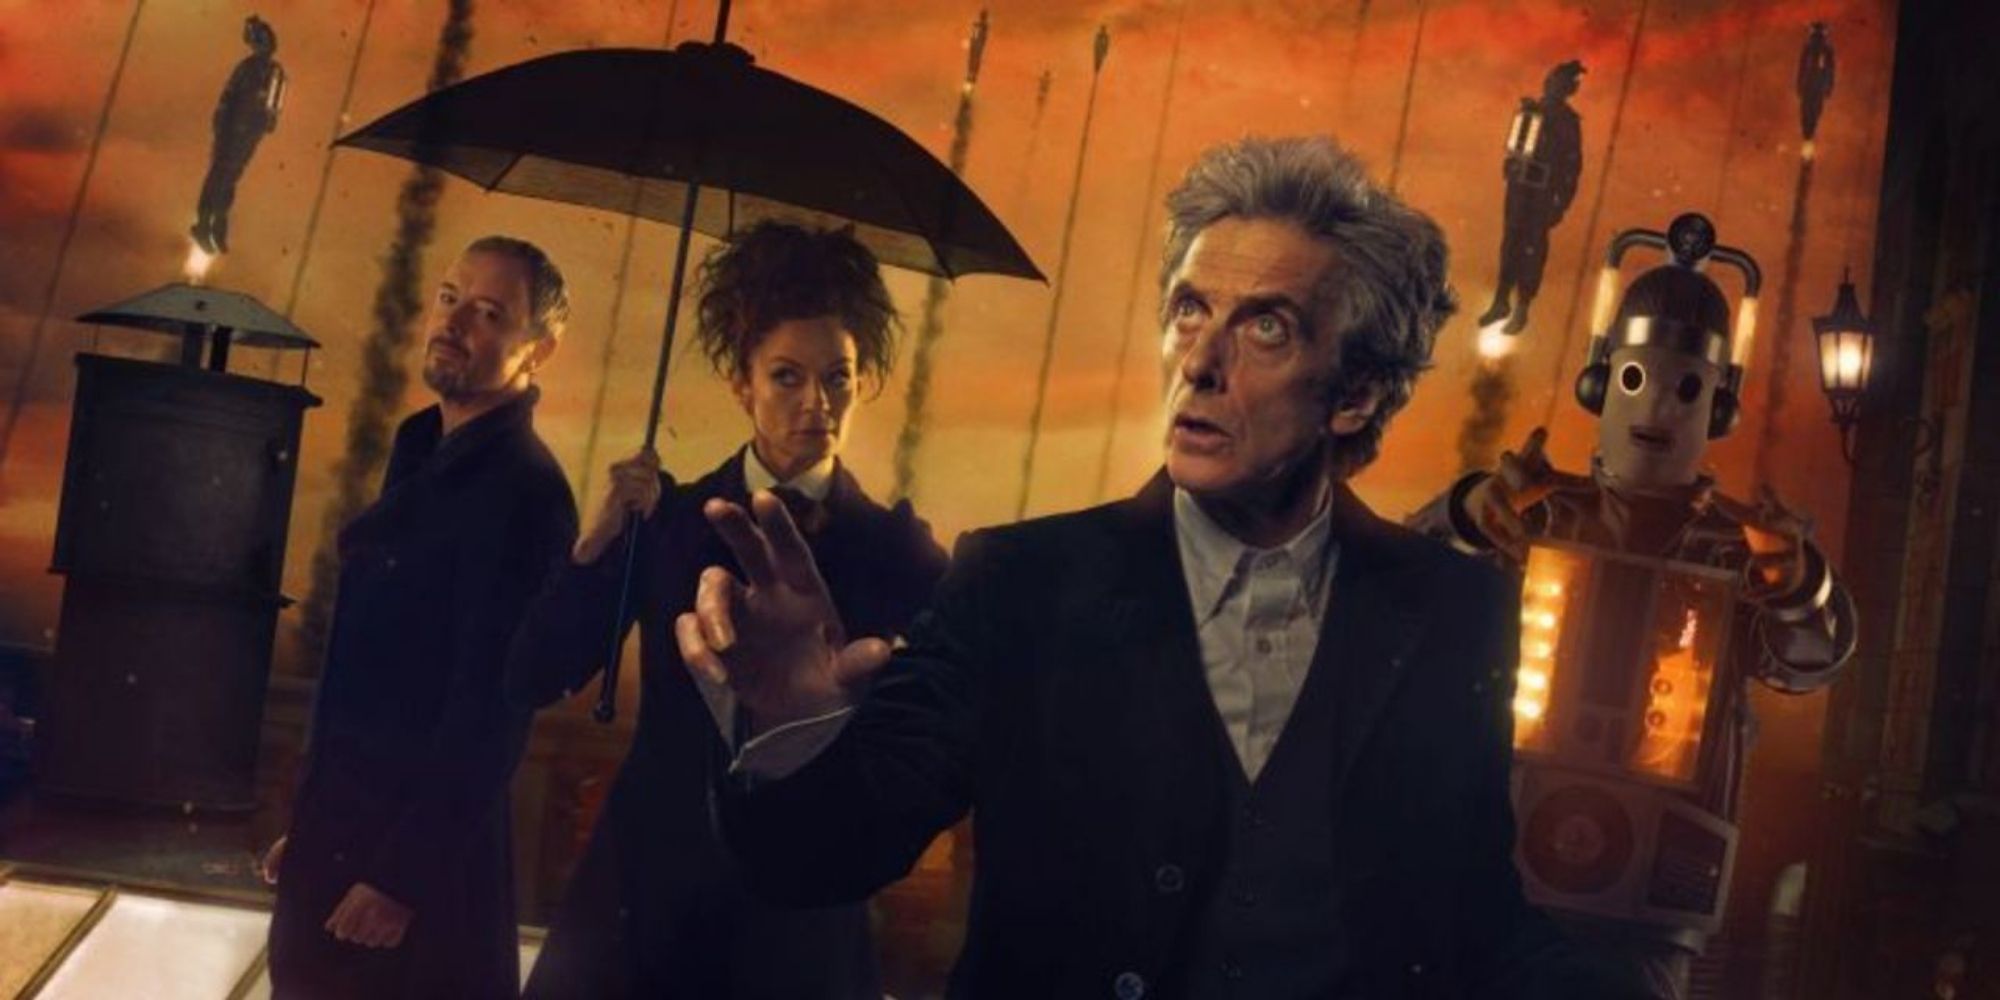 Promotional image of The Doctor Falls, an episode from the TV show Doctor Who.